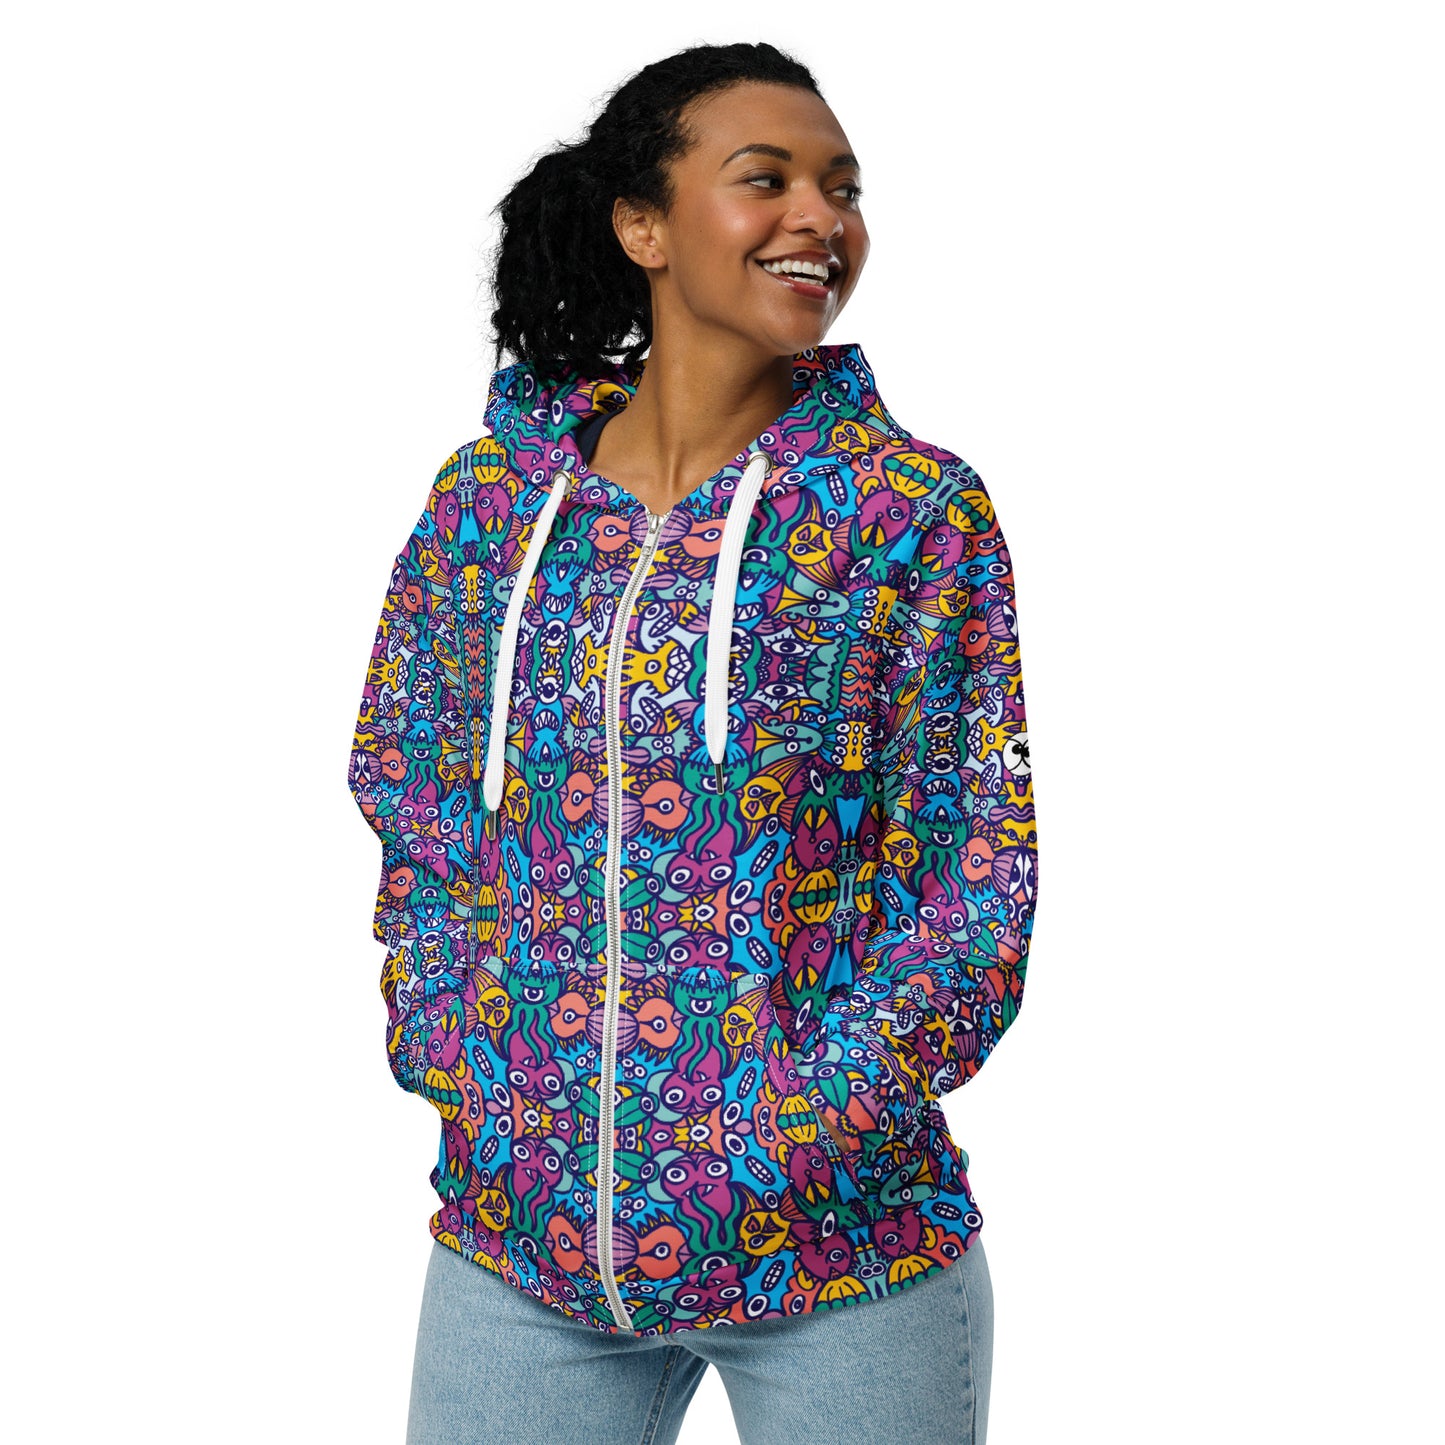 Whimsical pattern full of multicolor alien critters - Unisex zip hoodie. Lifestyle